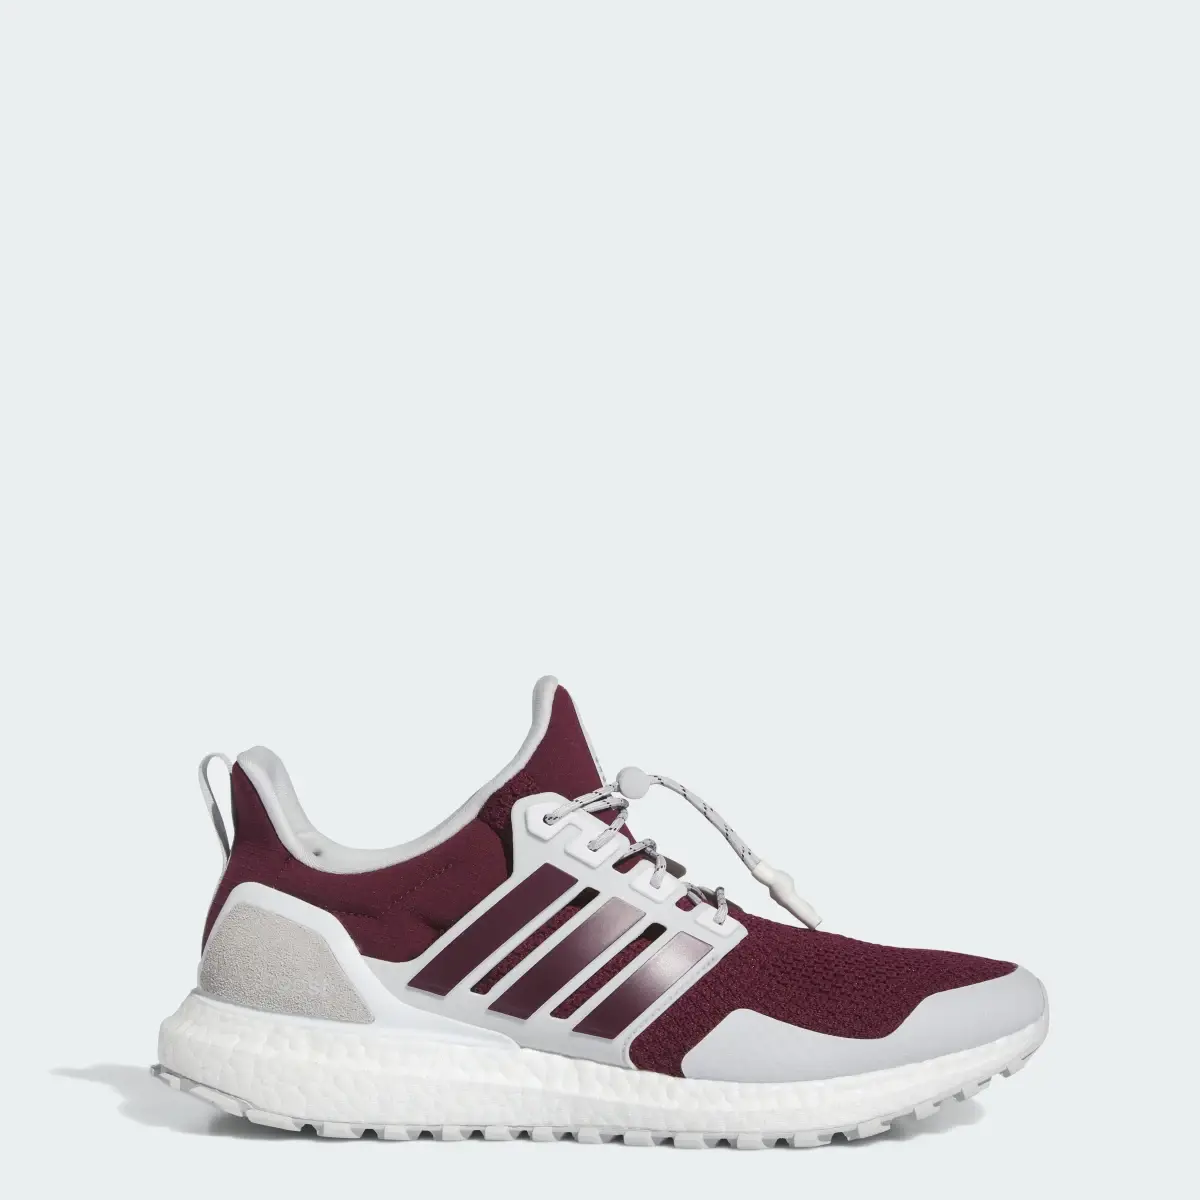 Adidas Mississippi State Ultraboost 1.0 Shoes. 1